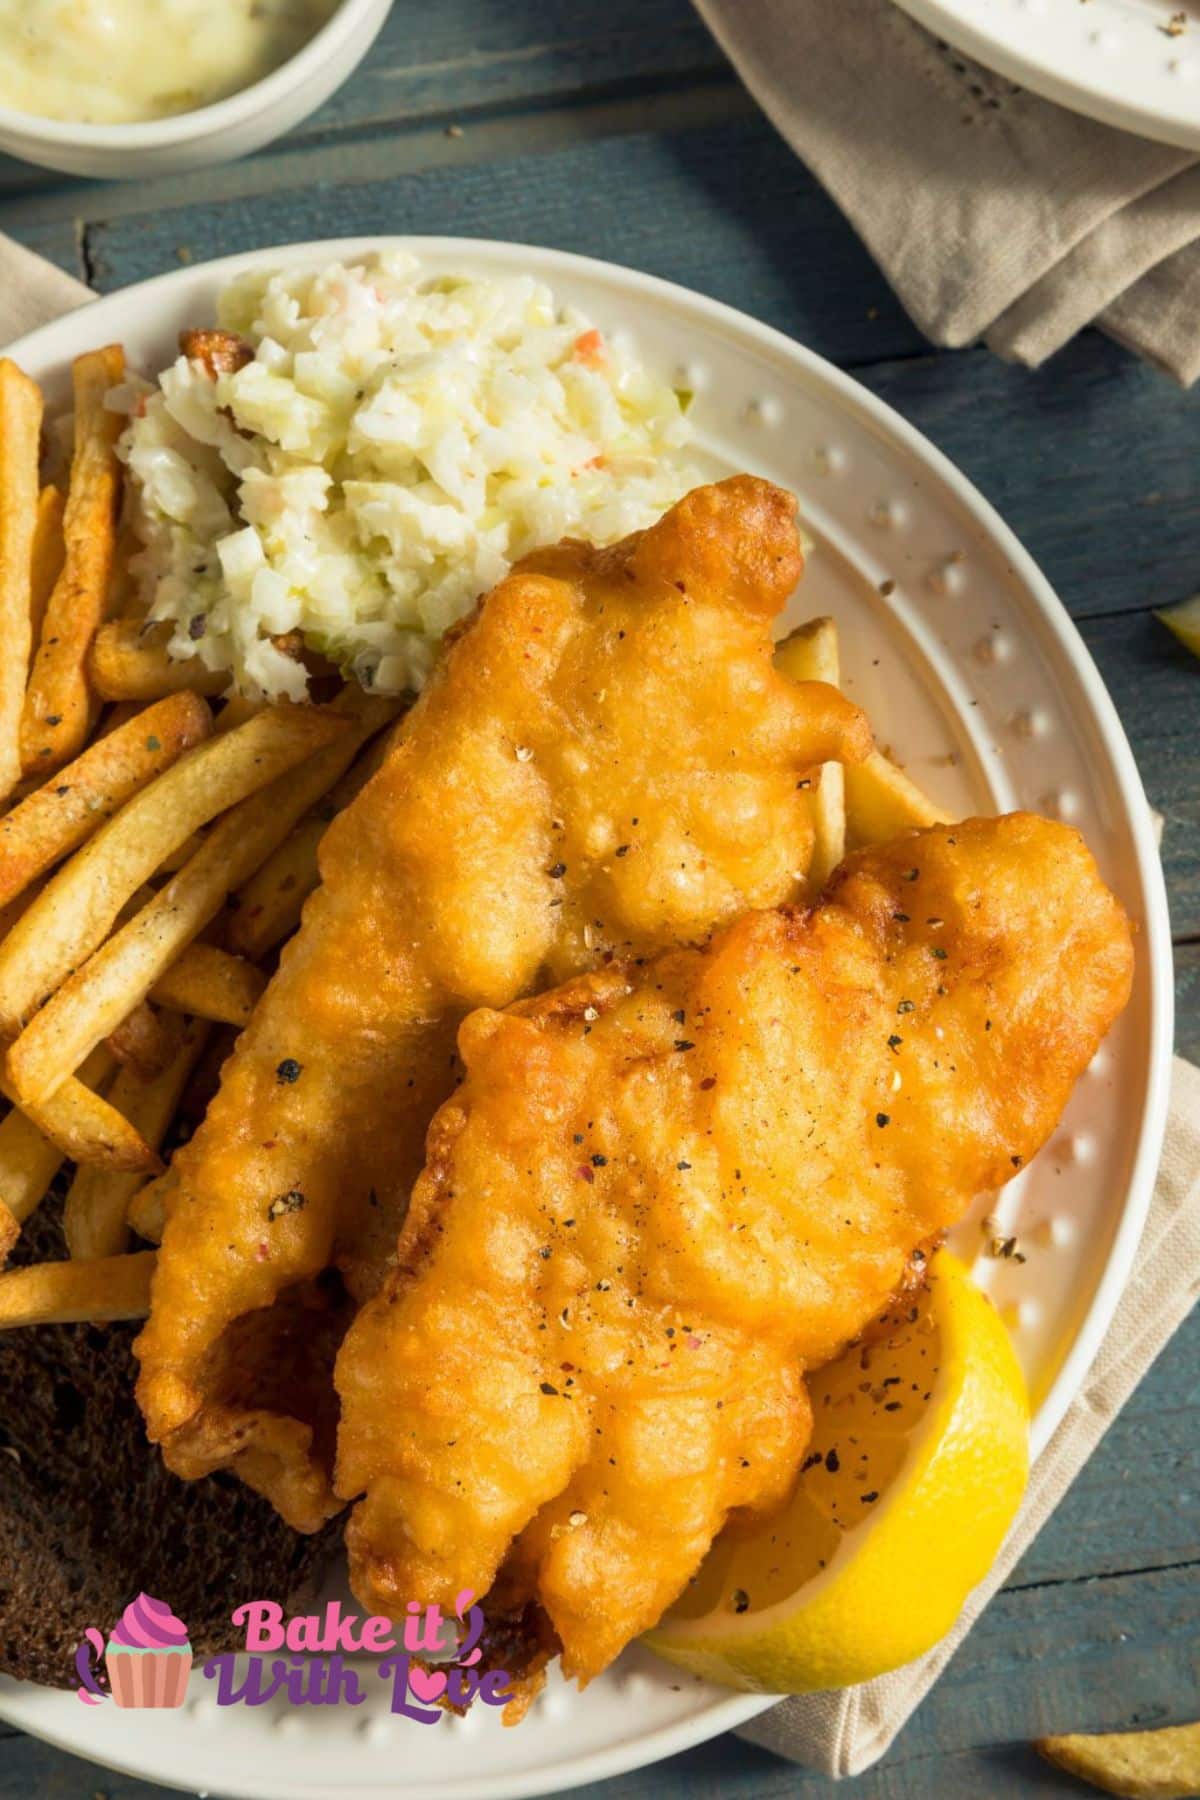 Tall image of deep fried catfish on a plate with coleslaw and fries.